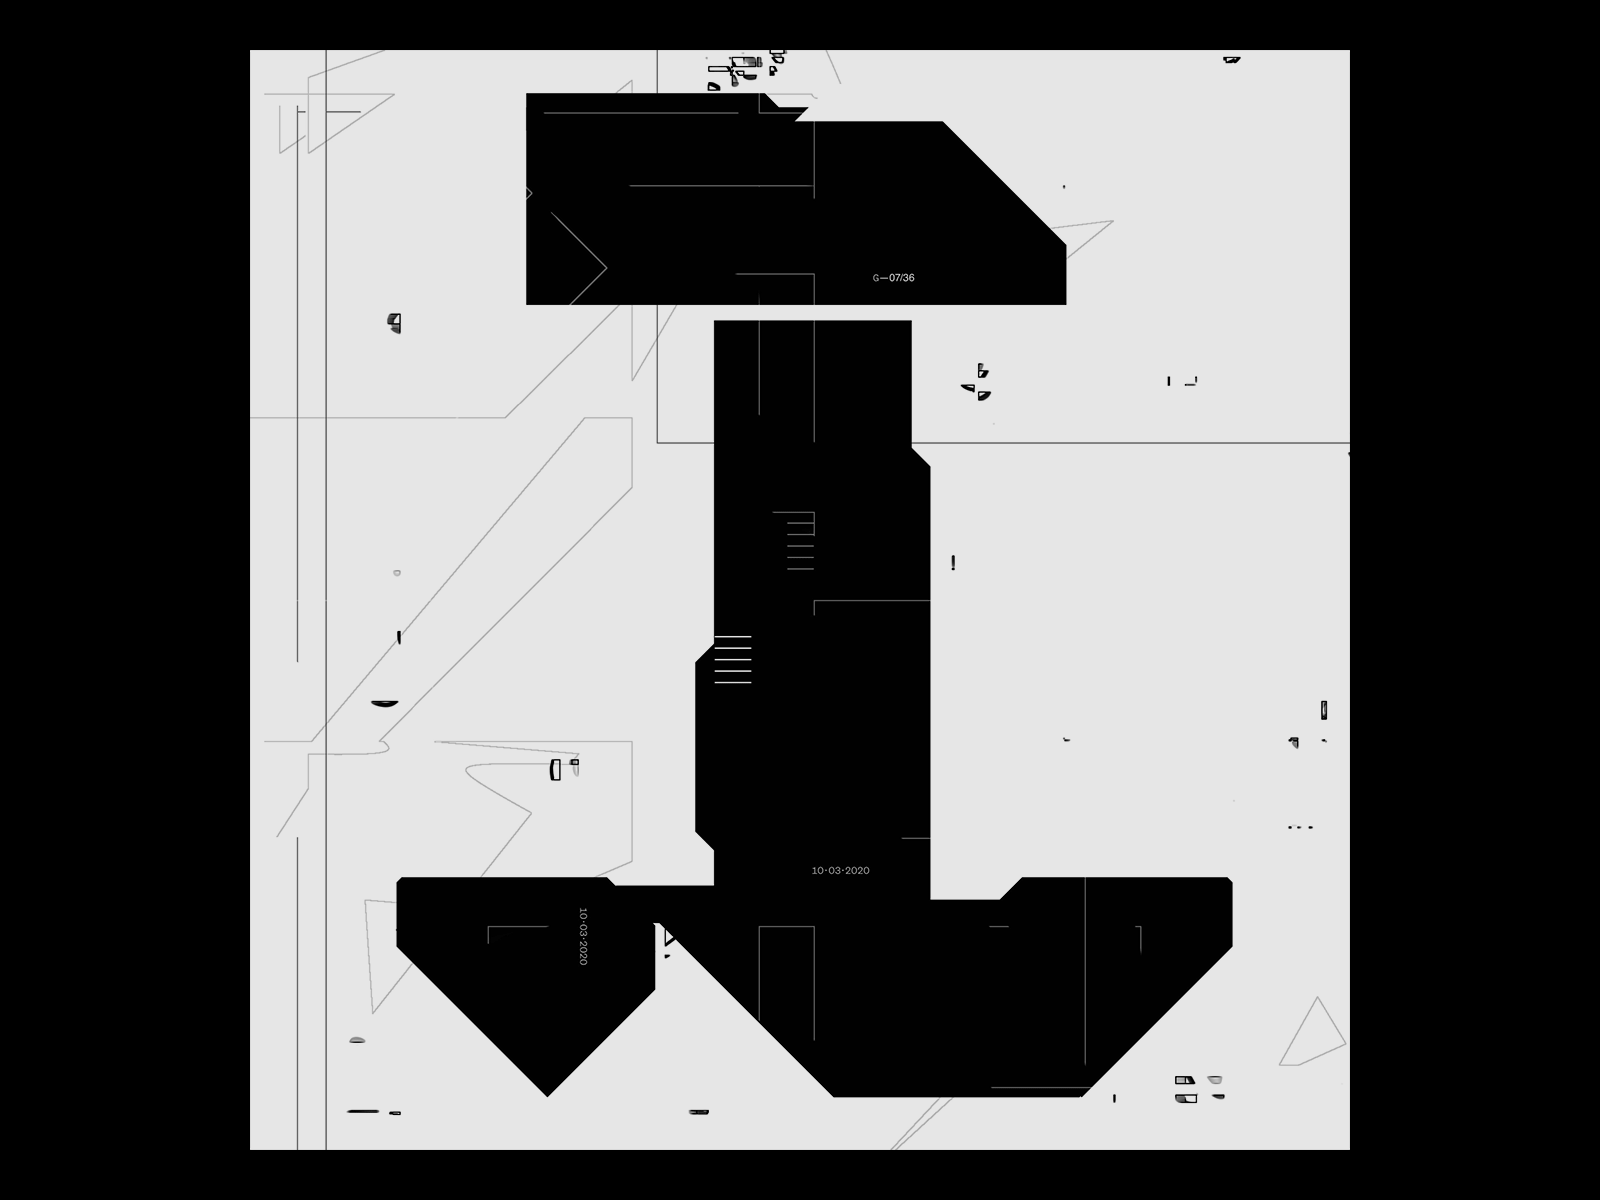 36 Days : I 36daysoftype after effects experiment generative lettering random